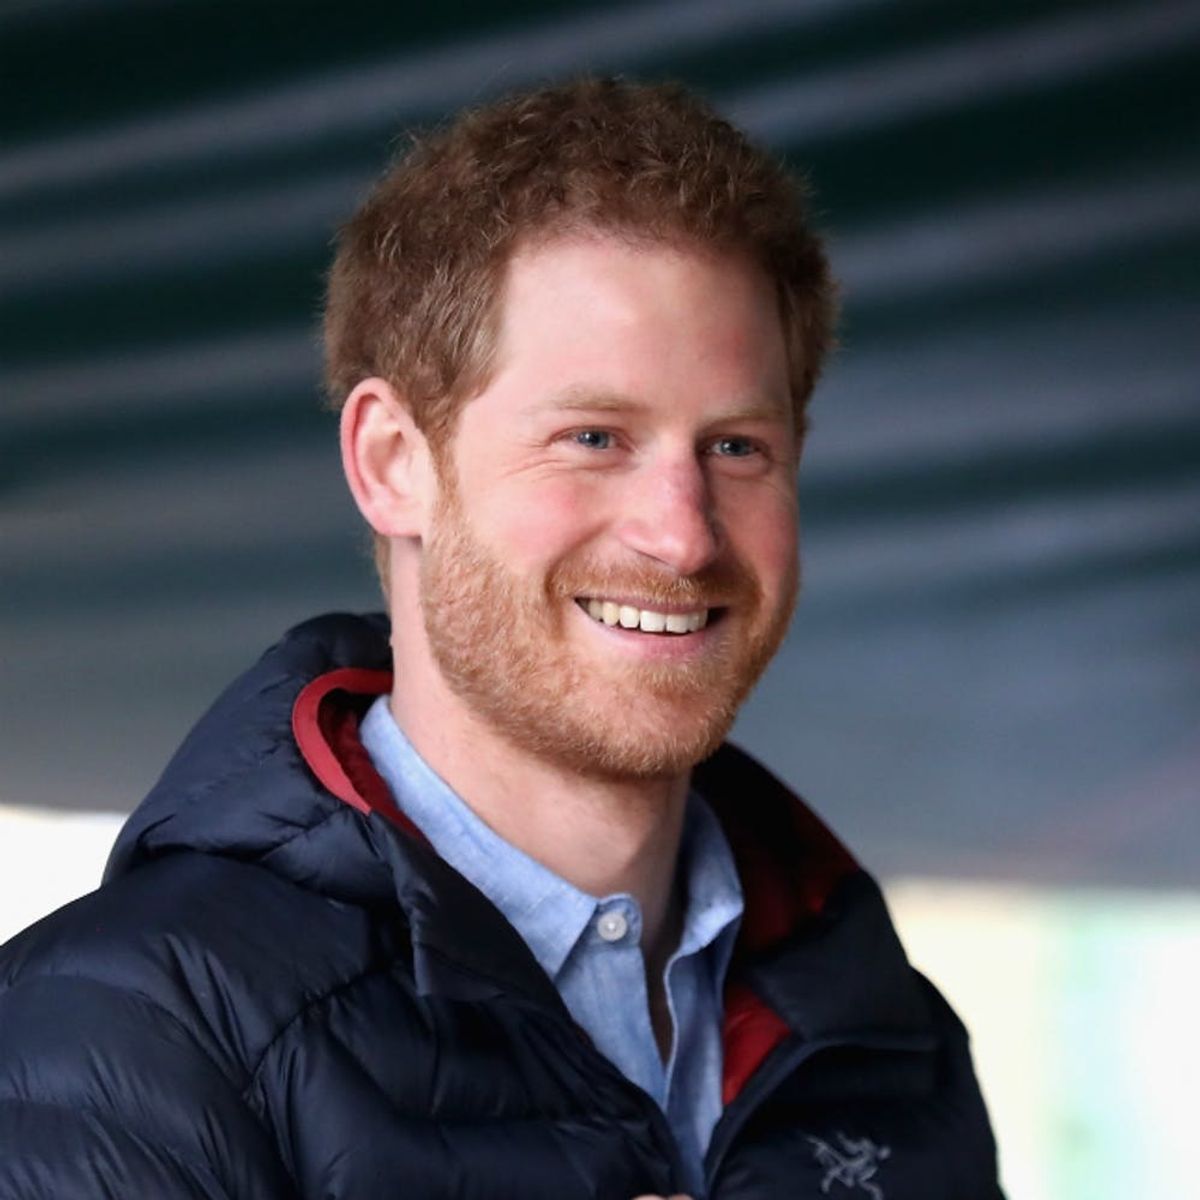 Prince Harry Jogging for Charity Will Make You Want to Strap Your Sneakers On